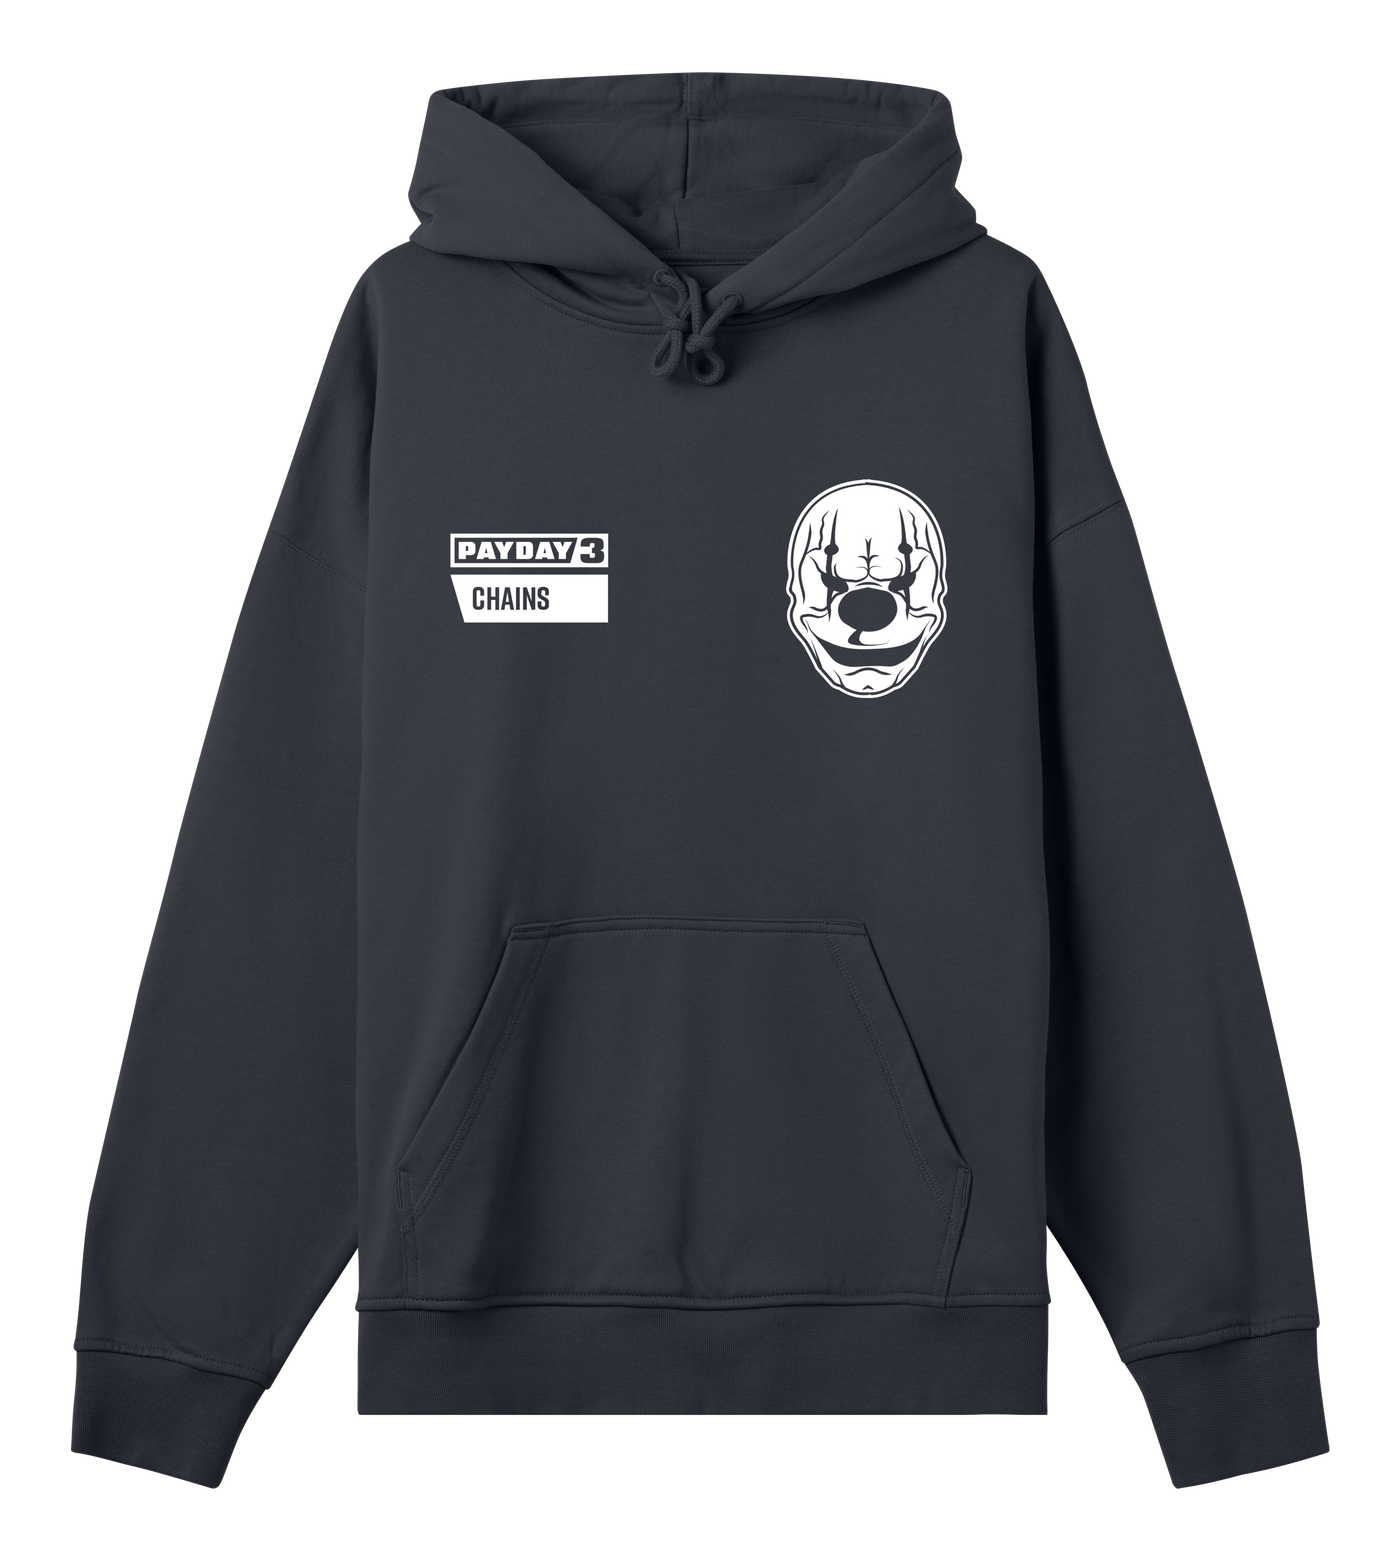 PAYDAY 3 - Chains Hoodie